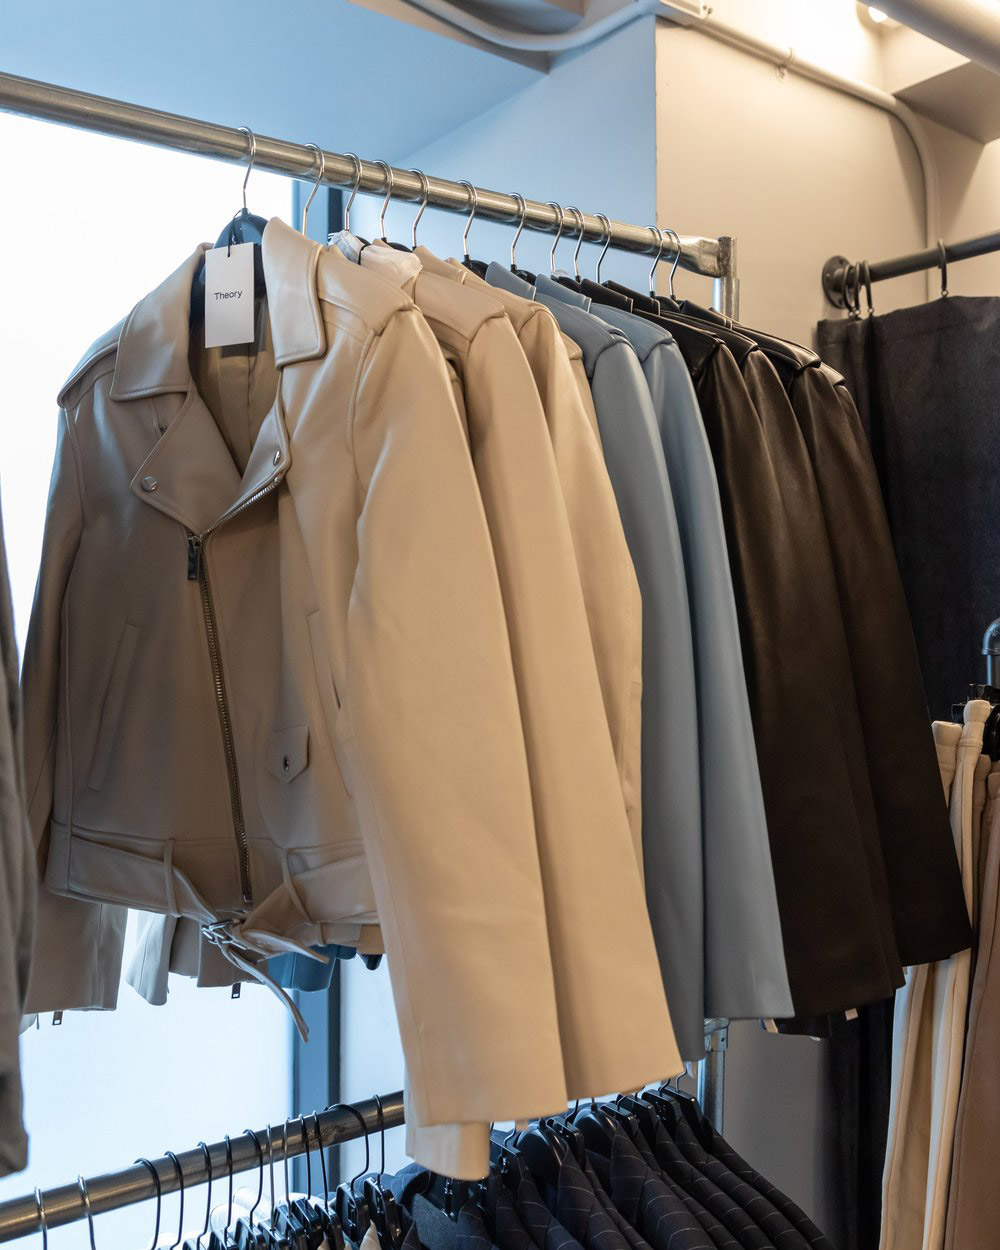 Theory Apparel & Accessories New York Sample Sale in Images